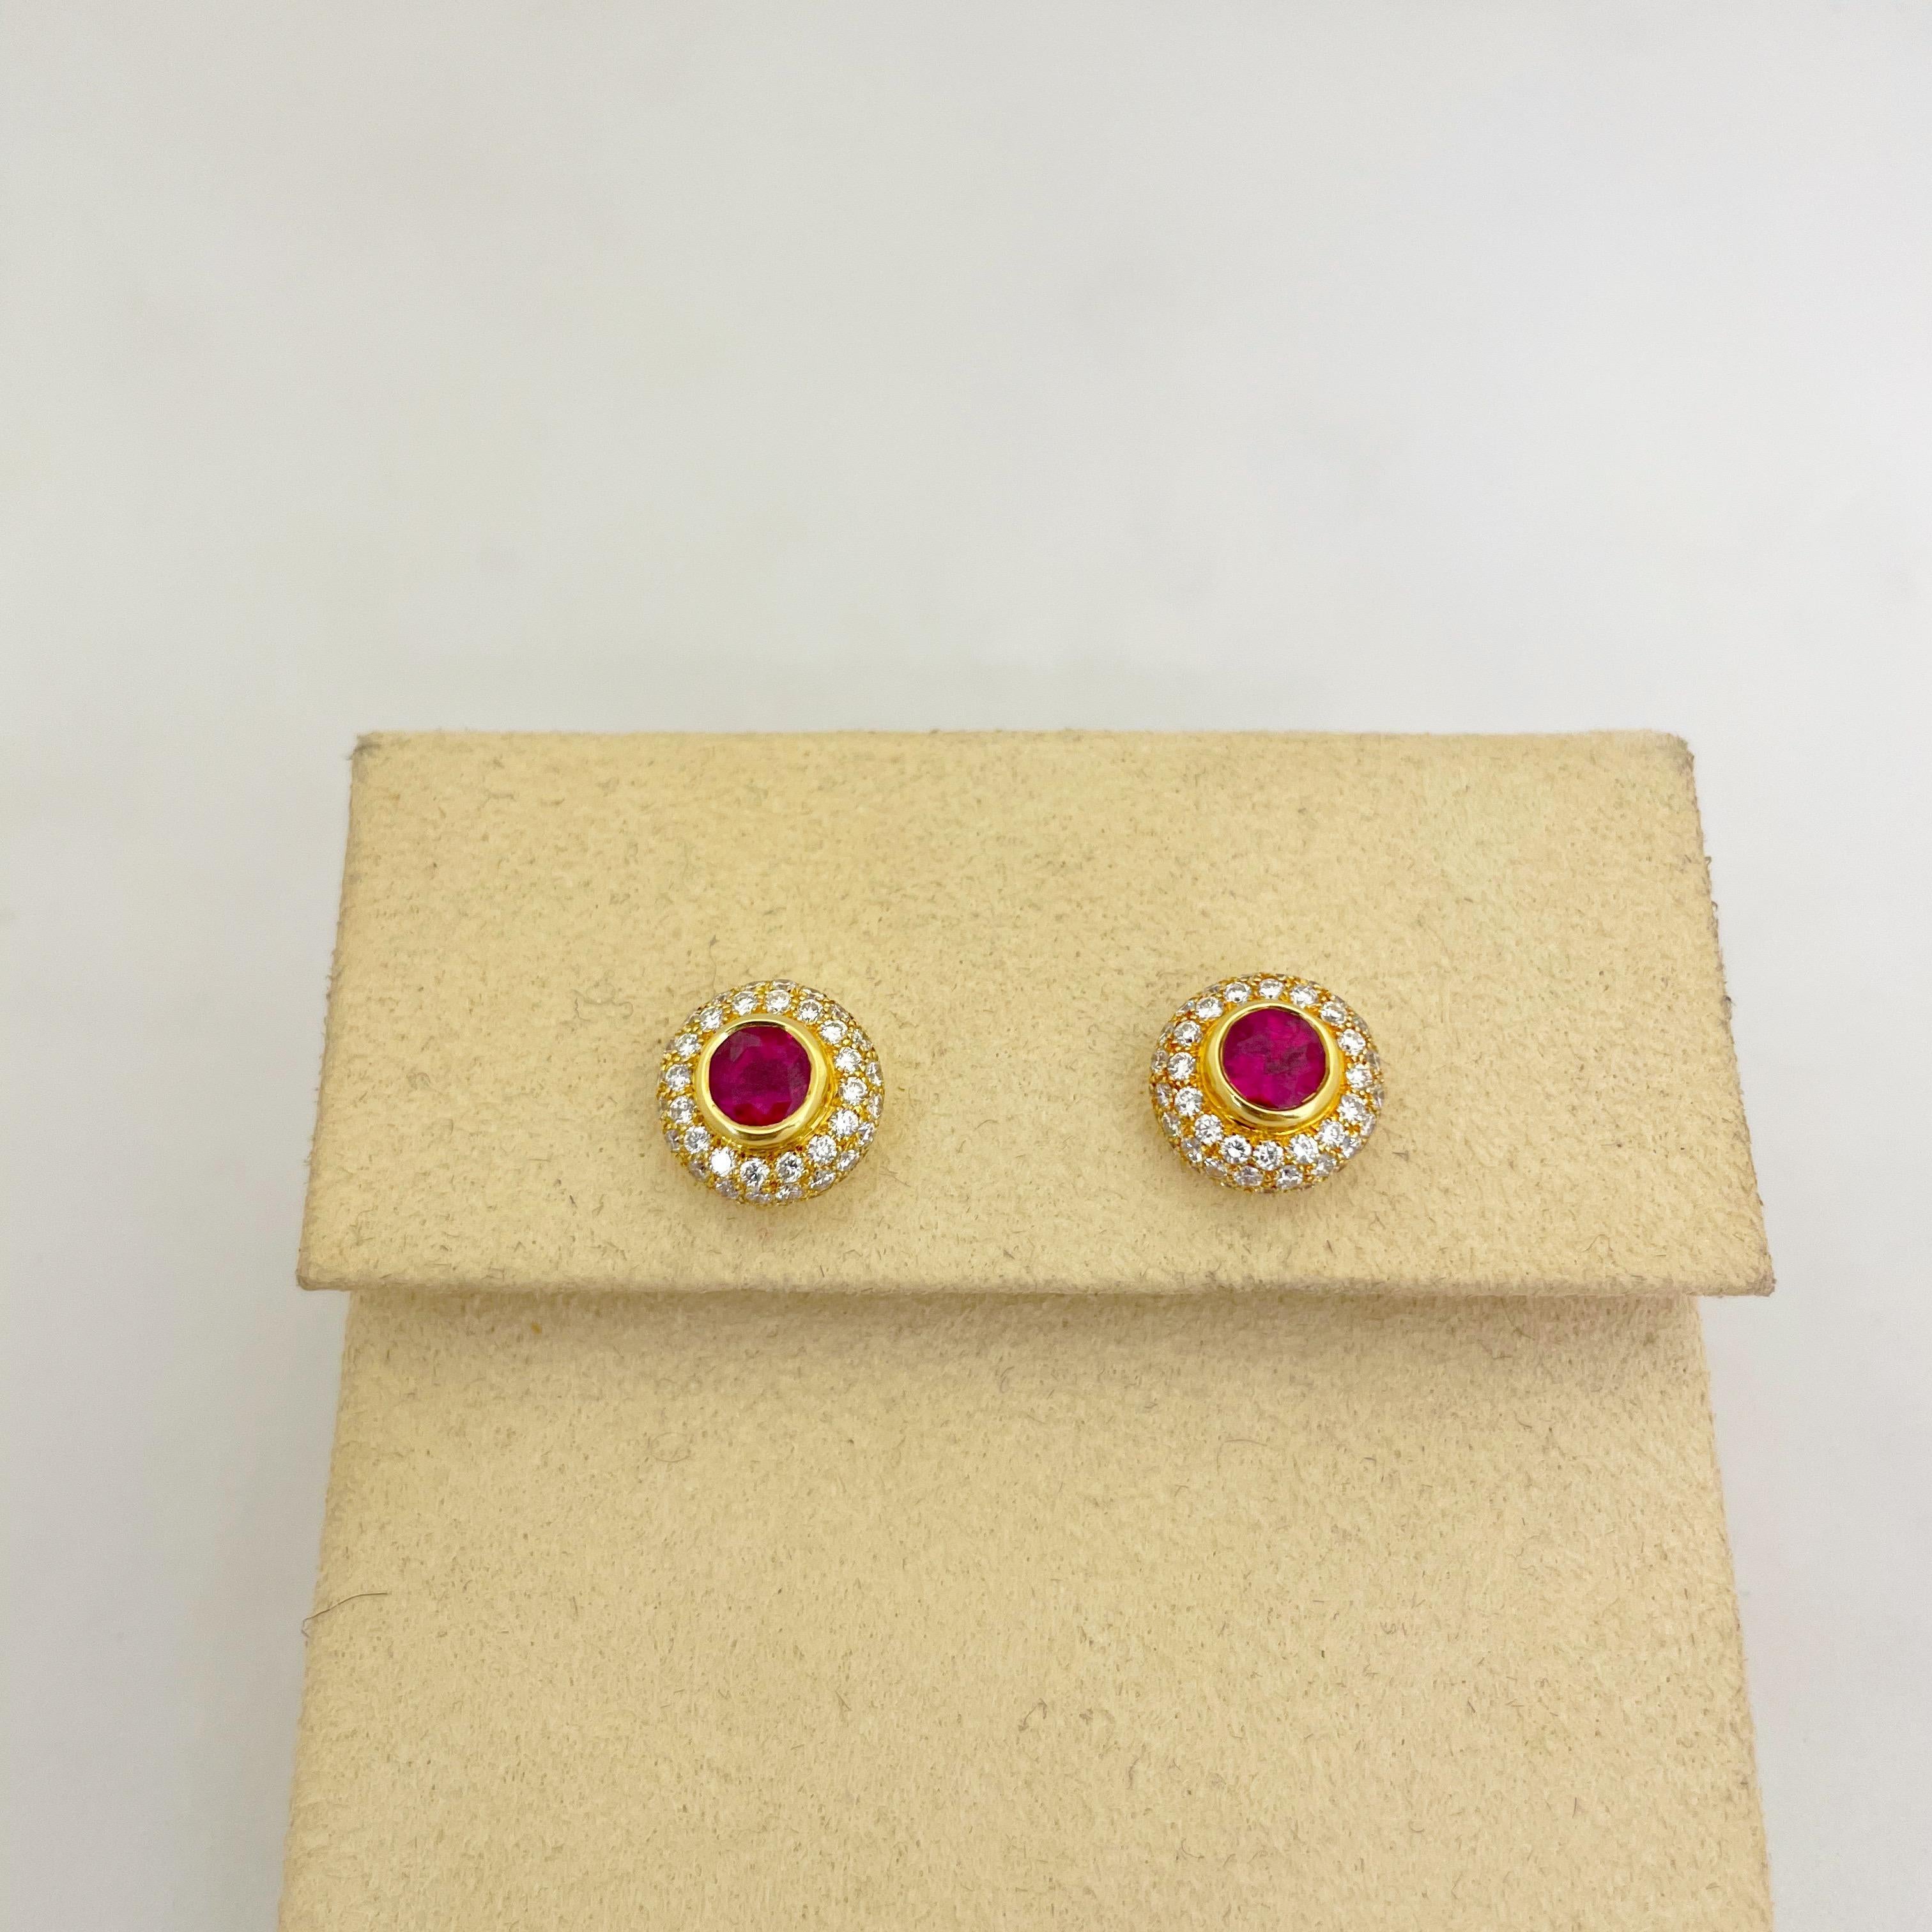 These beautiful studs feature 1.48cts of round rubies bezel set in 18kt yellow gold among 1.37cts of white round brilliant pave diamonds. 
These unique studs are easy to wear both day and night, casual or dressy.
Signed Linderman